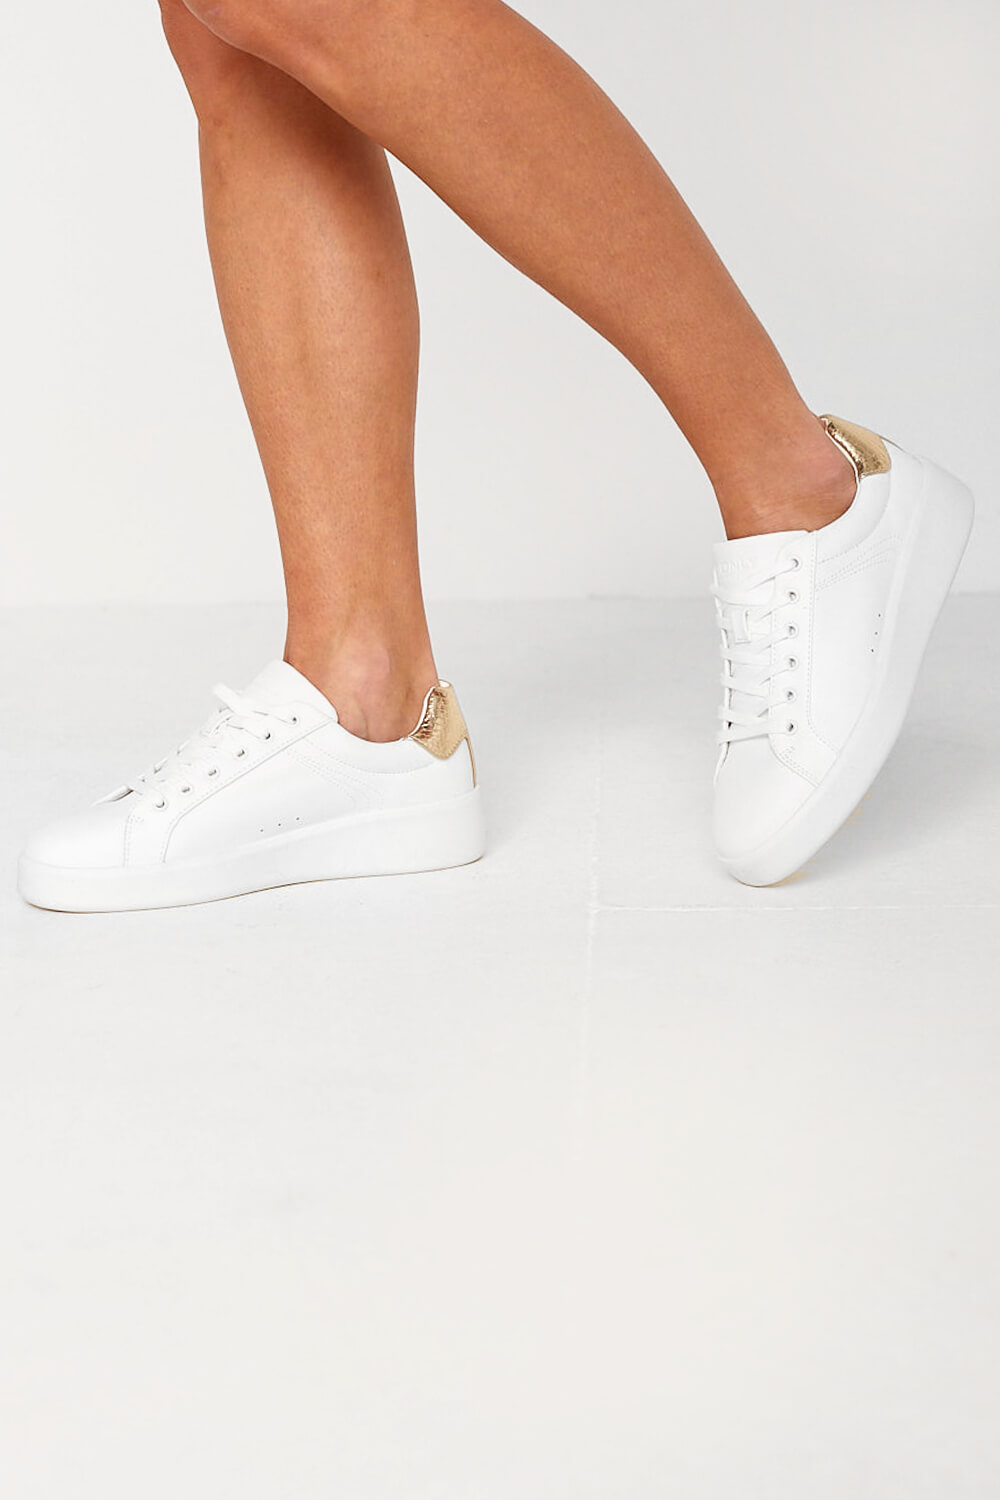 Truffle Collection chunky bubble sole sneakers in white | ASOS